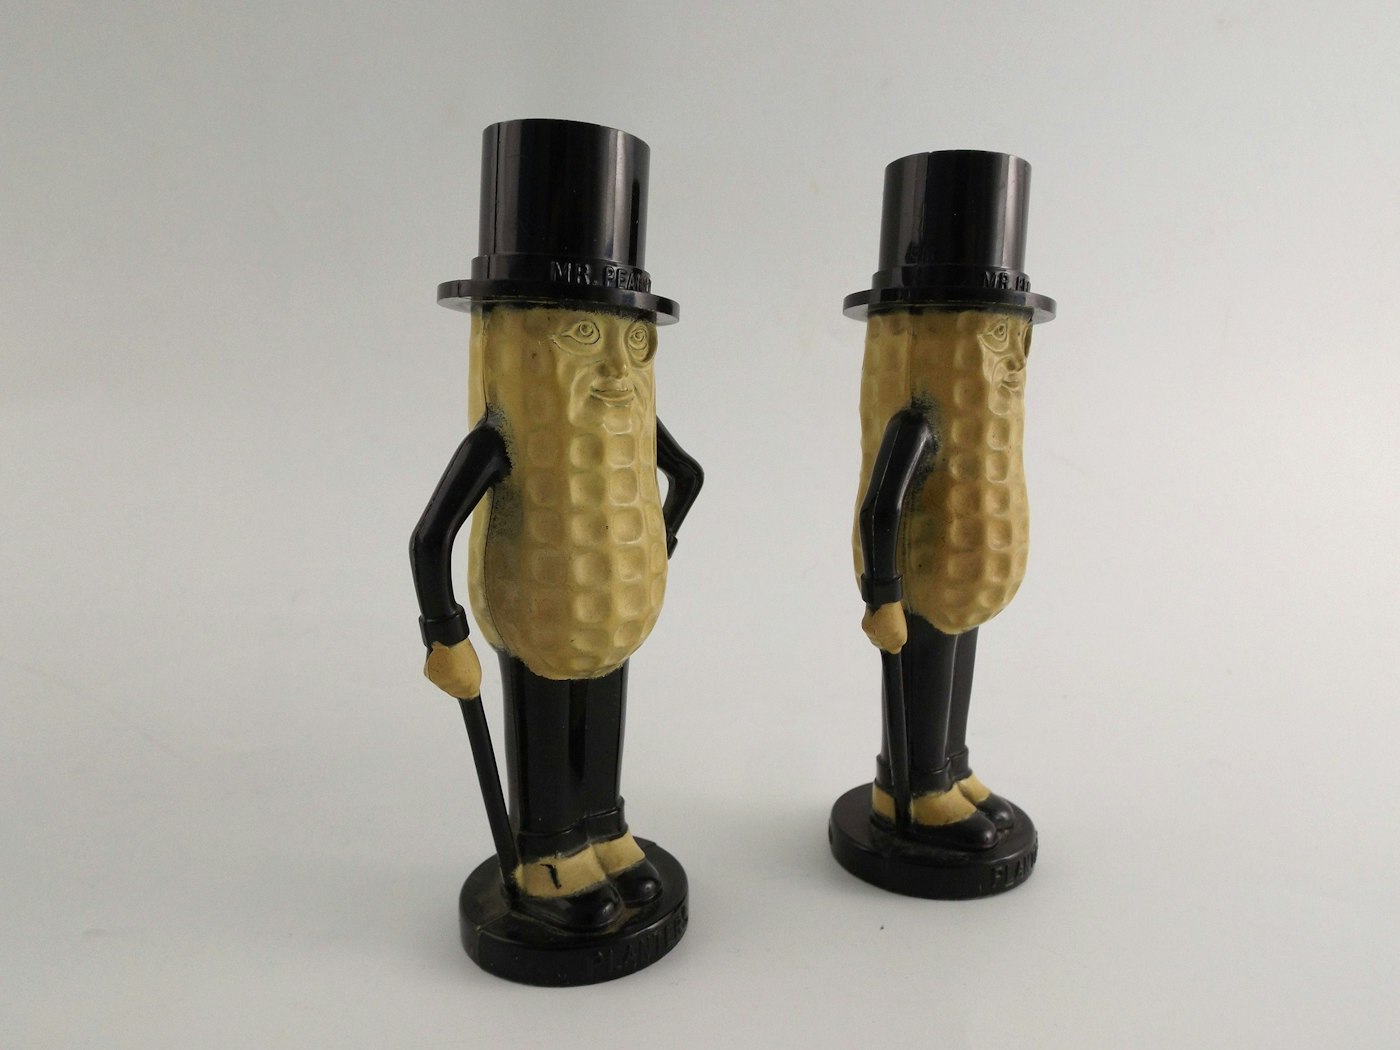 A Pair of Pyro Planters Mr. Peanut Salt and Pepper Shakers | EBTH